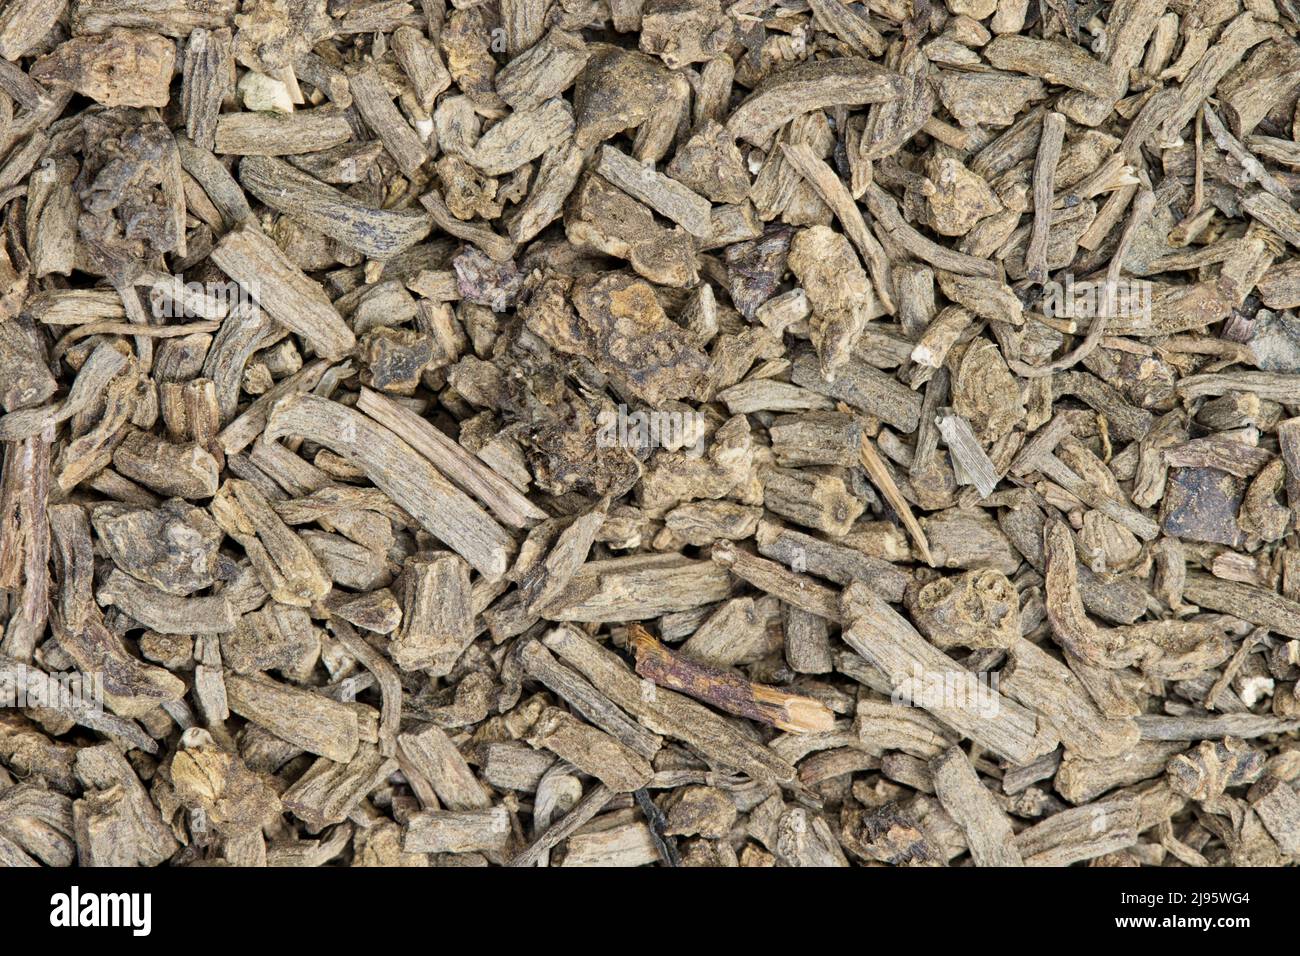 Dried Valerian root pieces (Valeriana officinalis), closeup background image. Traditional medicinal herb also used as a cat attractant. Stock Photo